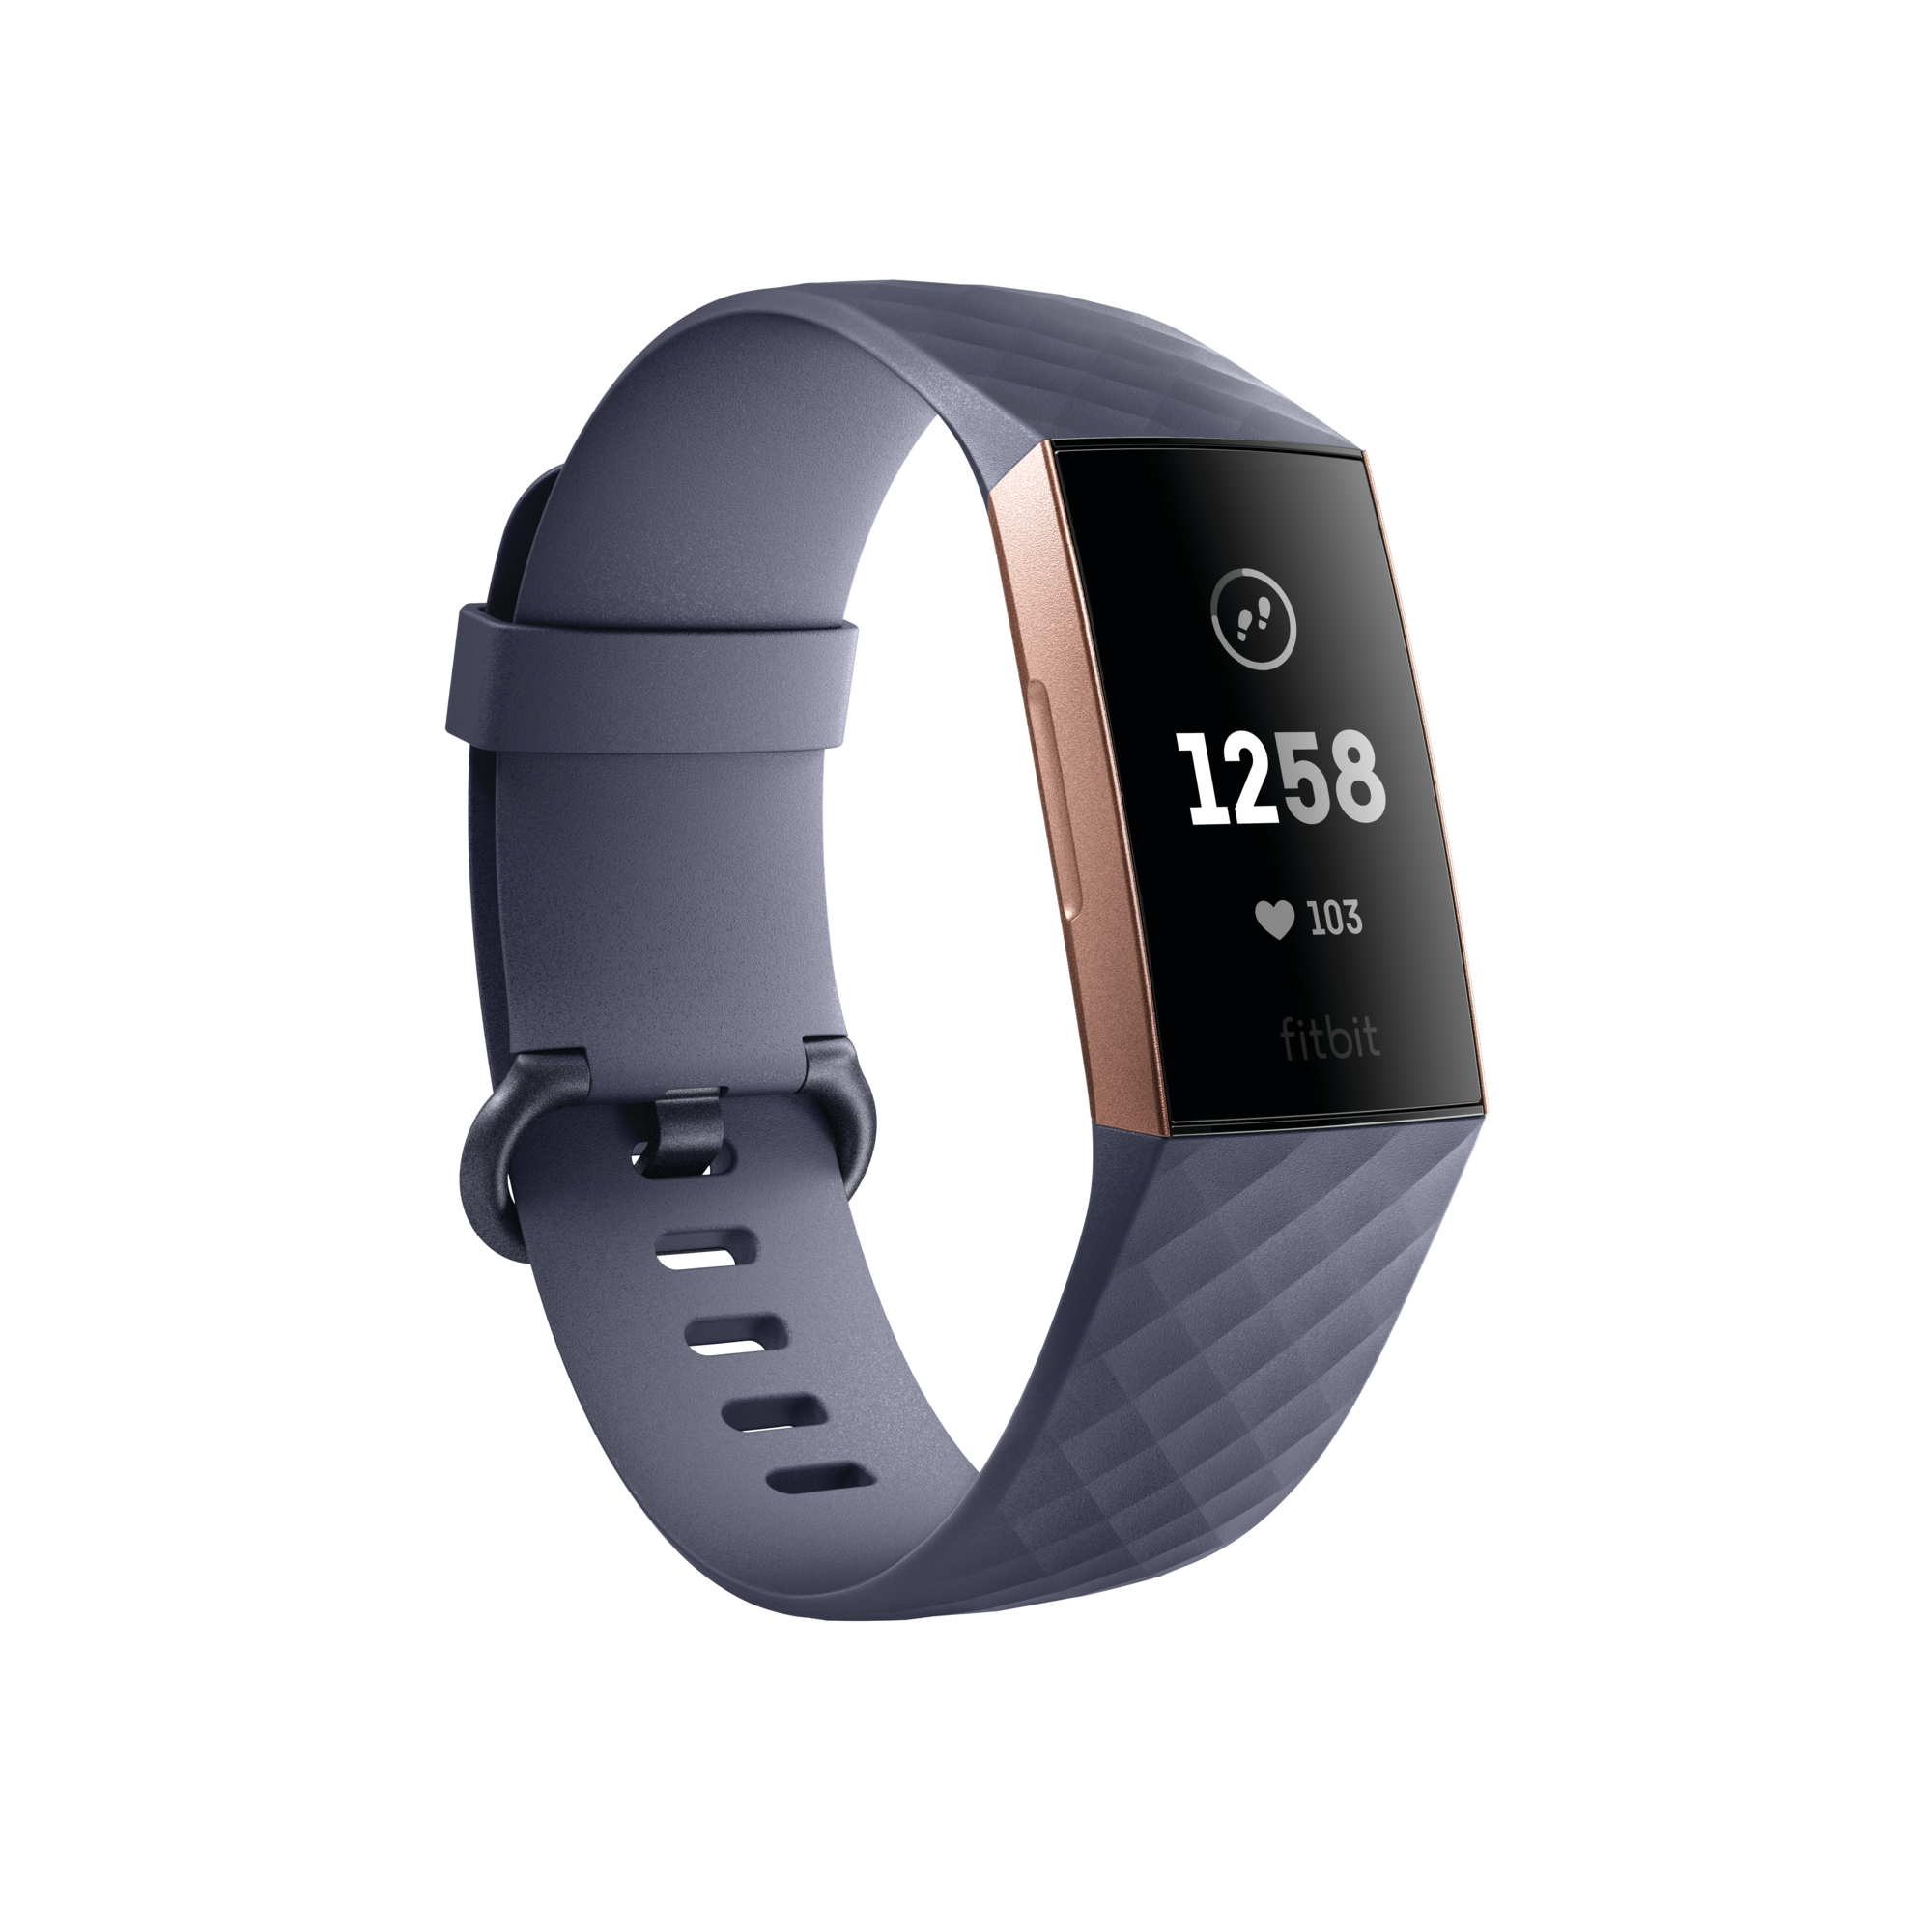 Fitbit Charge 2 Size Chart